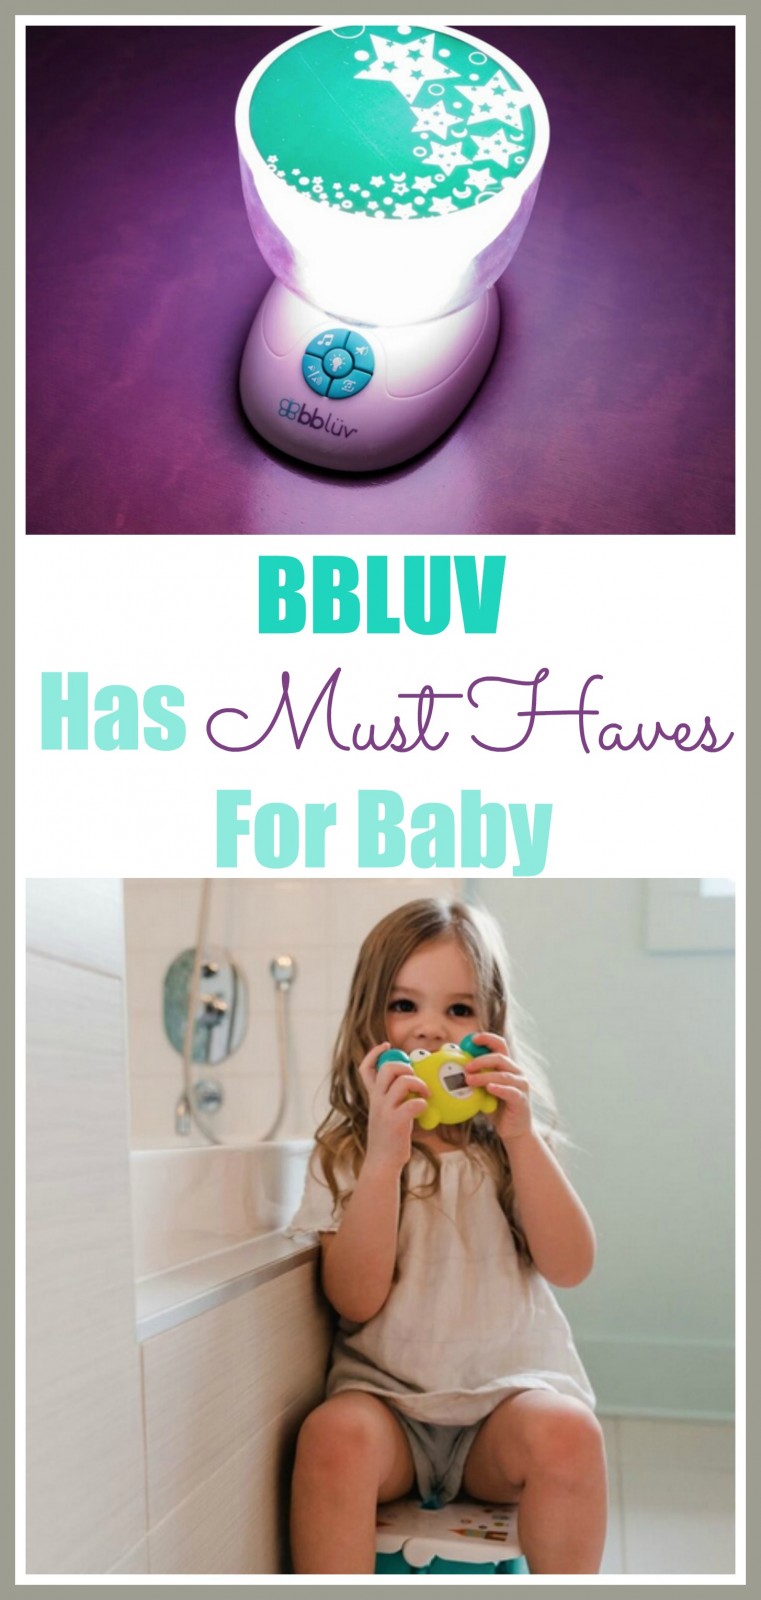 BBLUV Offers Must Haves For Baby